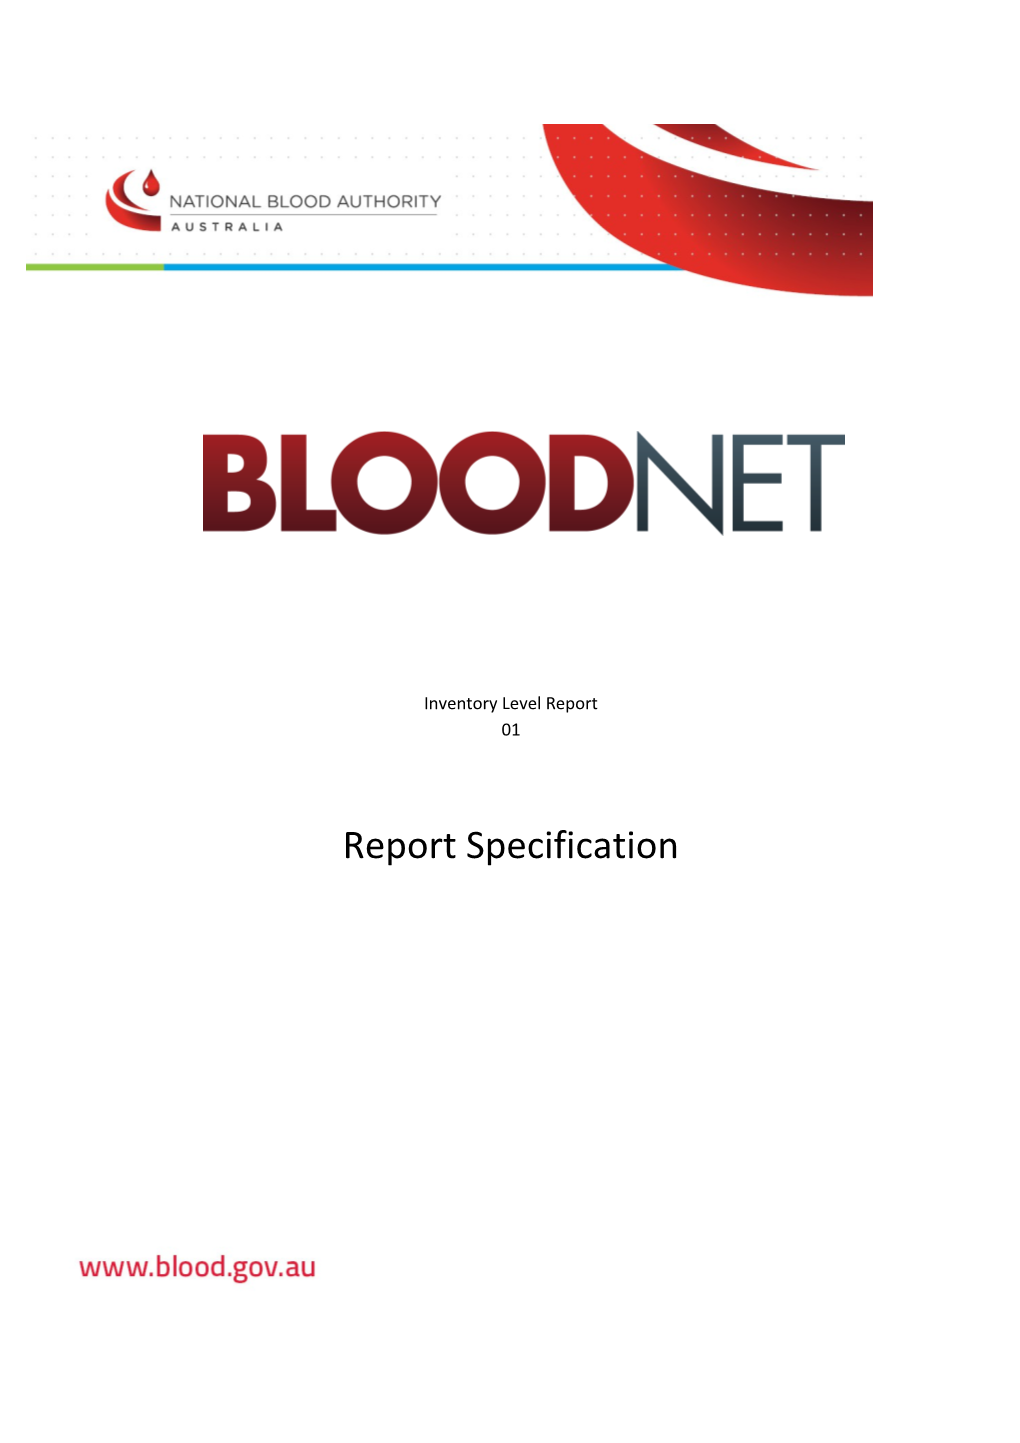 NBA - Bloodnet - INV001 - National Health Provider Inventory Level Report Specification